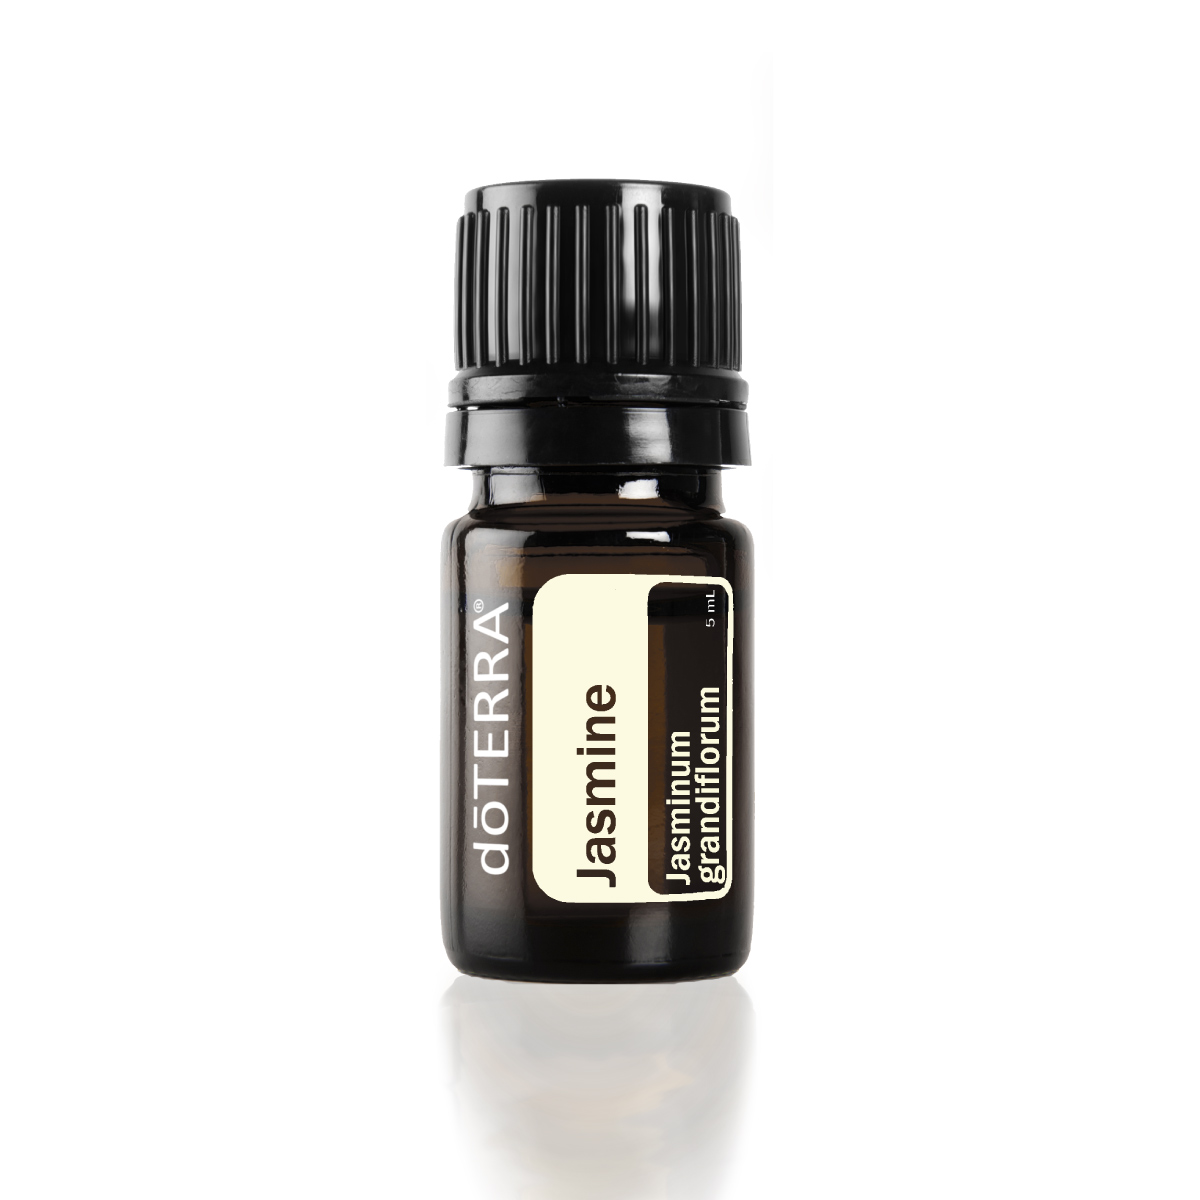 doTERRA Jasmine essential oil bottle. What are the benefits of Jasmine oil? Jasmine oil can promote a clear complexion, reduce the appearance of skin imperfections, promote relaxation, and can be useful for massage. 